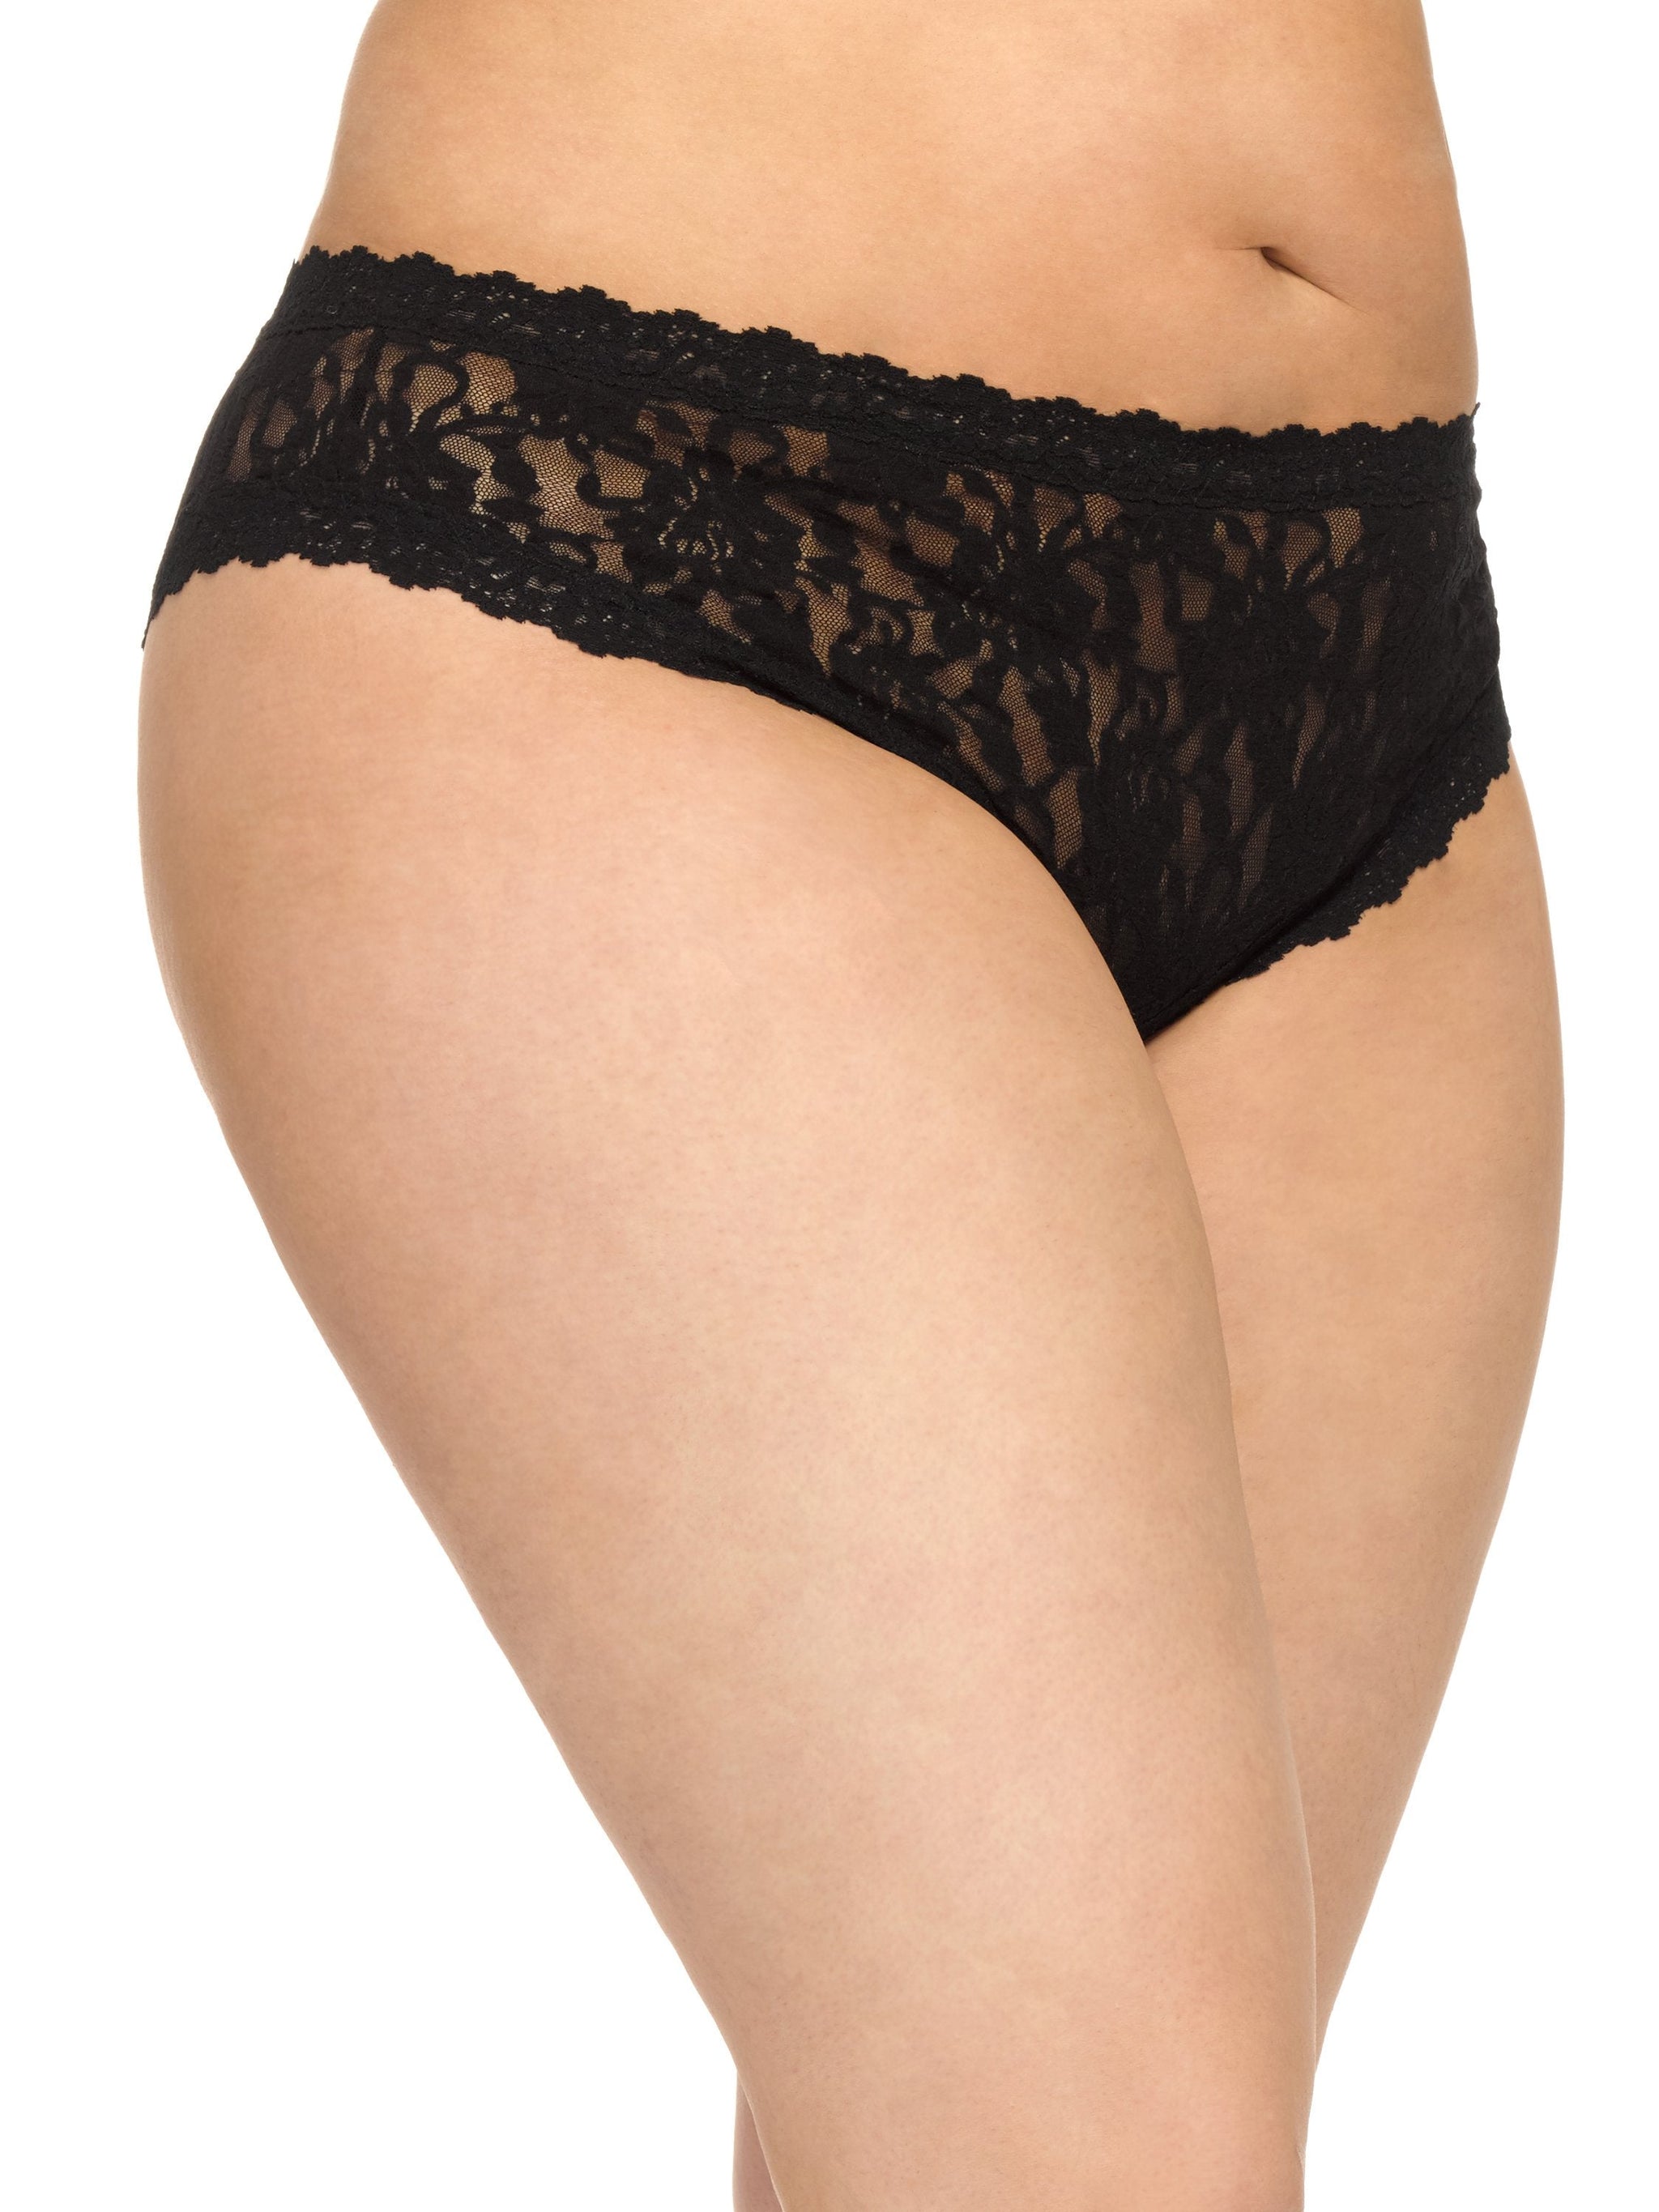 Julimex Flexi One Midi Panty Black  Lumingerie bras and underwear for big  busts